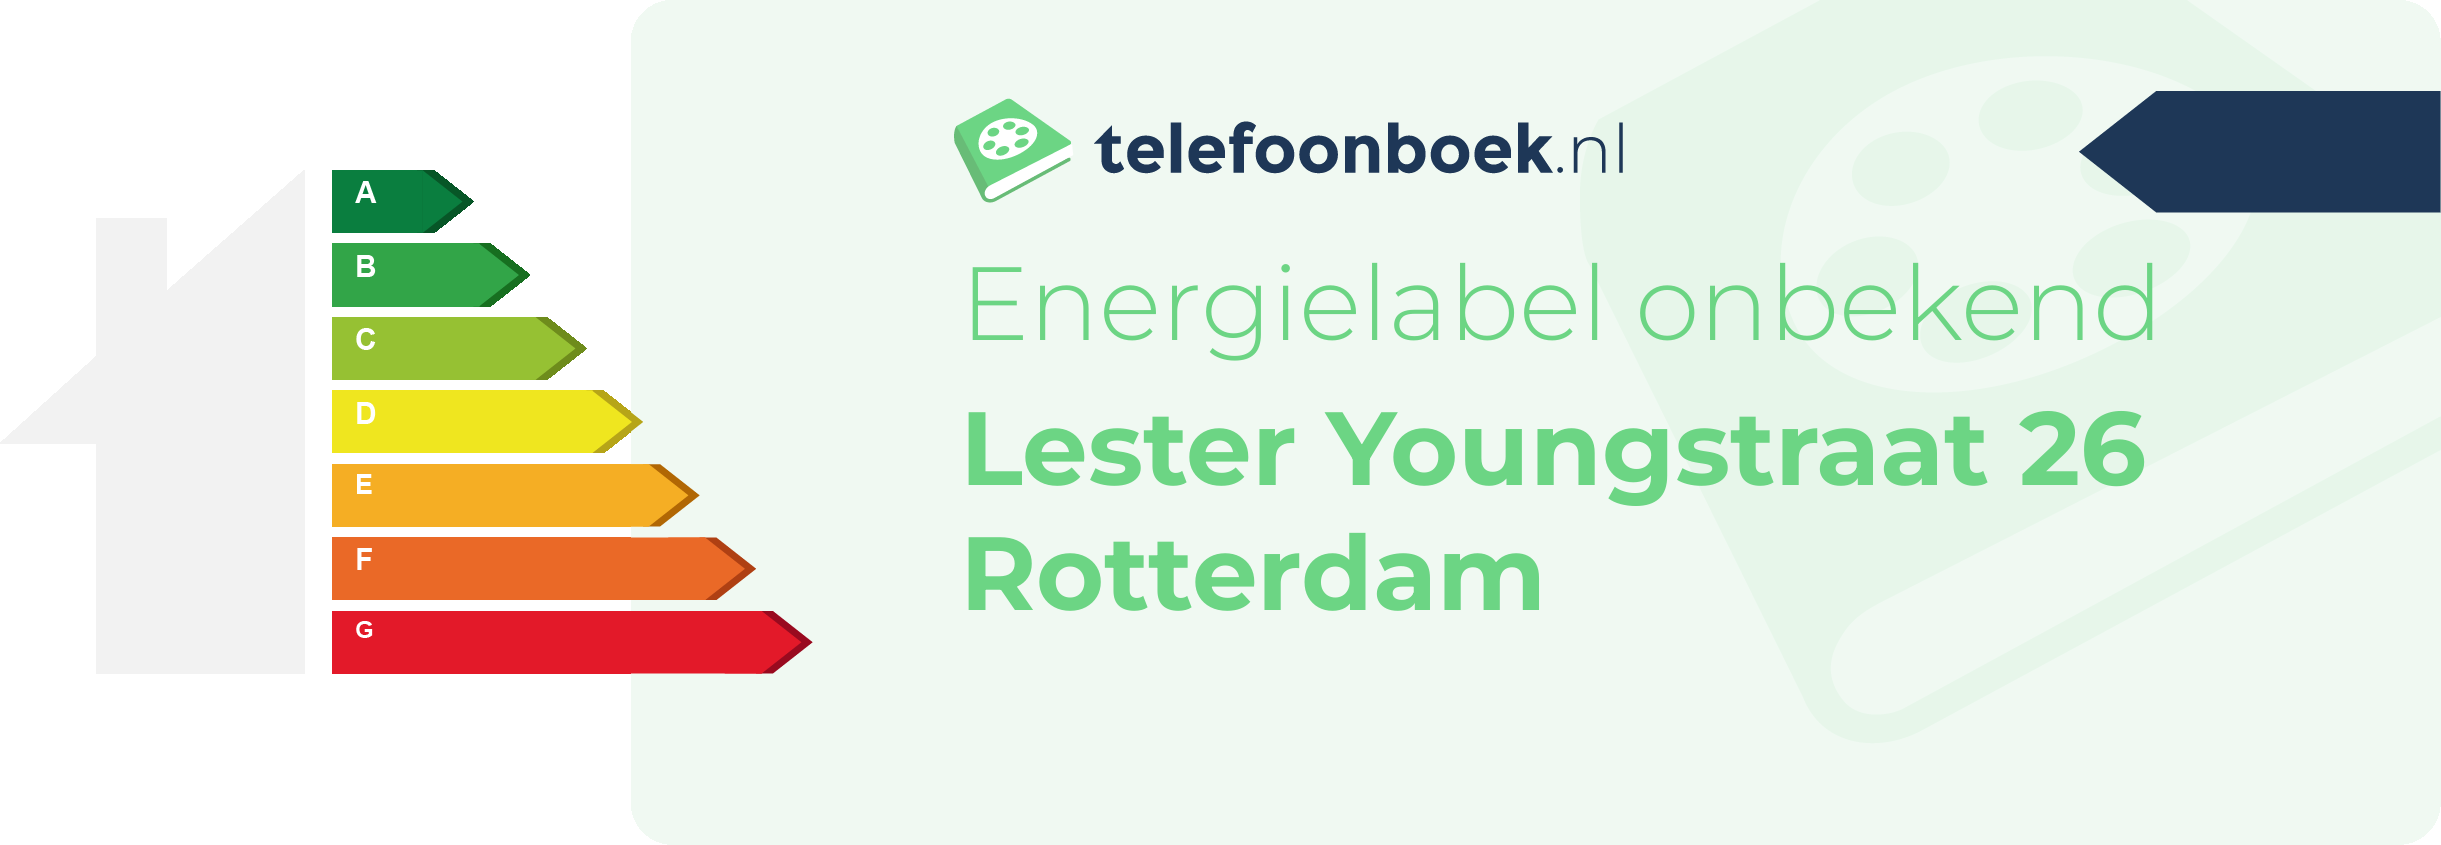 Energielabel Lester Youngstraat 26 Rotterdam